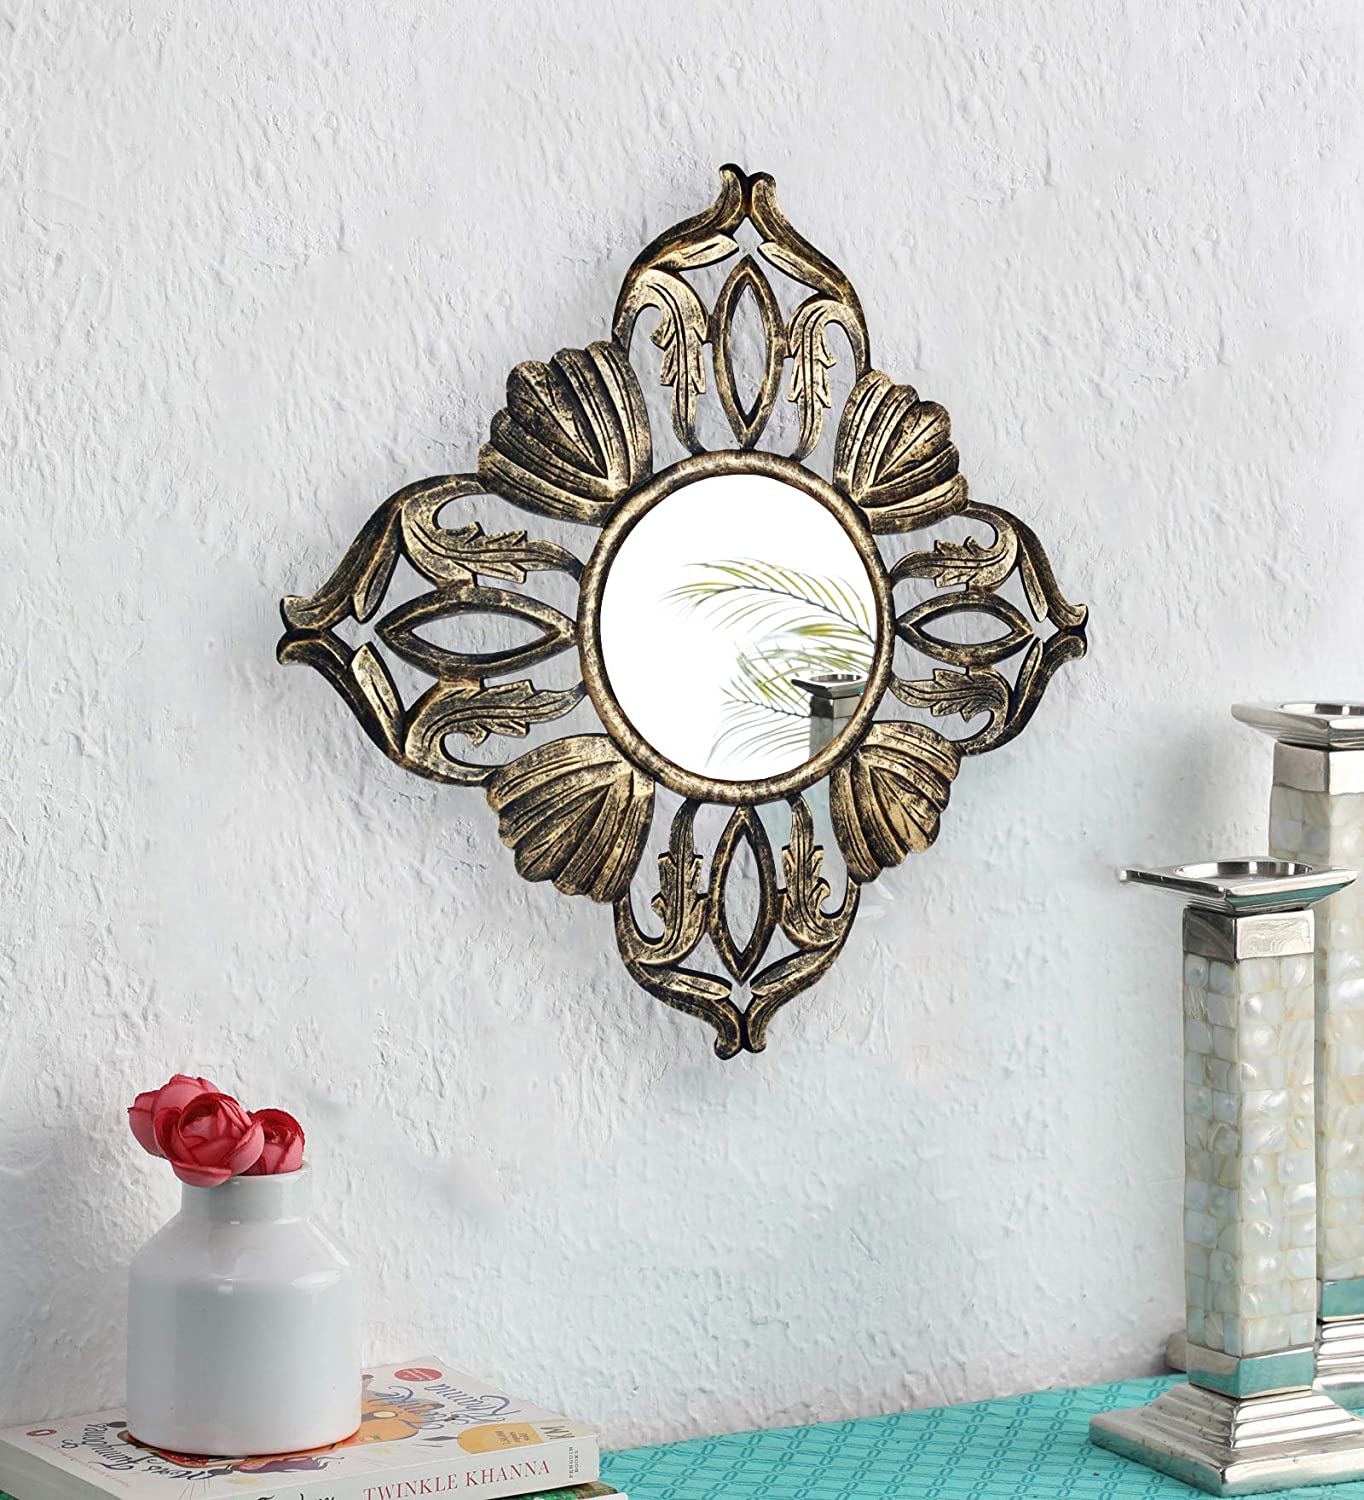 Wood Hand Crafted Square Antique Finished Vanity Wall Mirror for Living Room, 20X20 Inches (Gold)